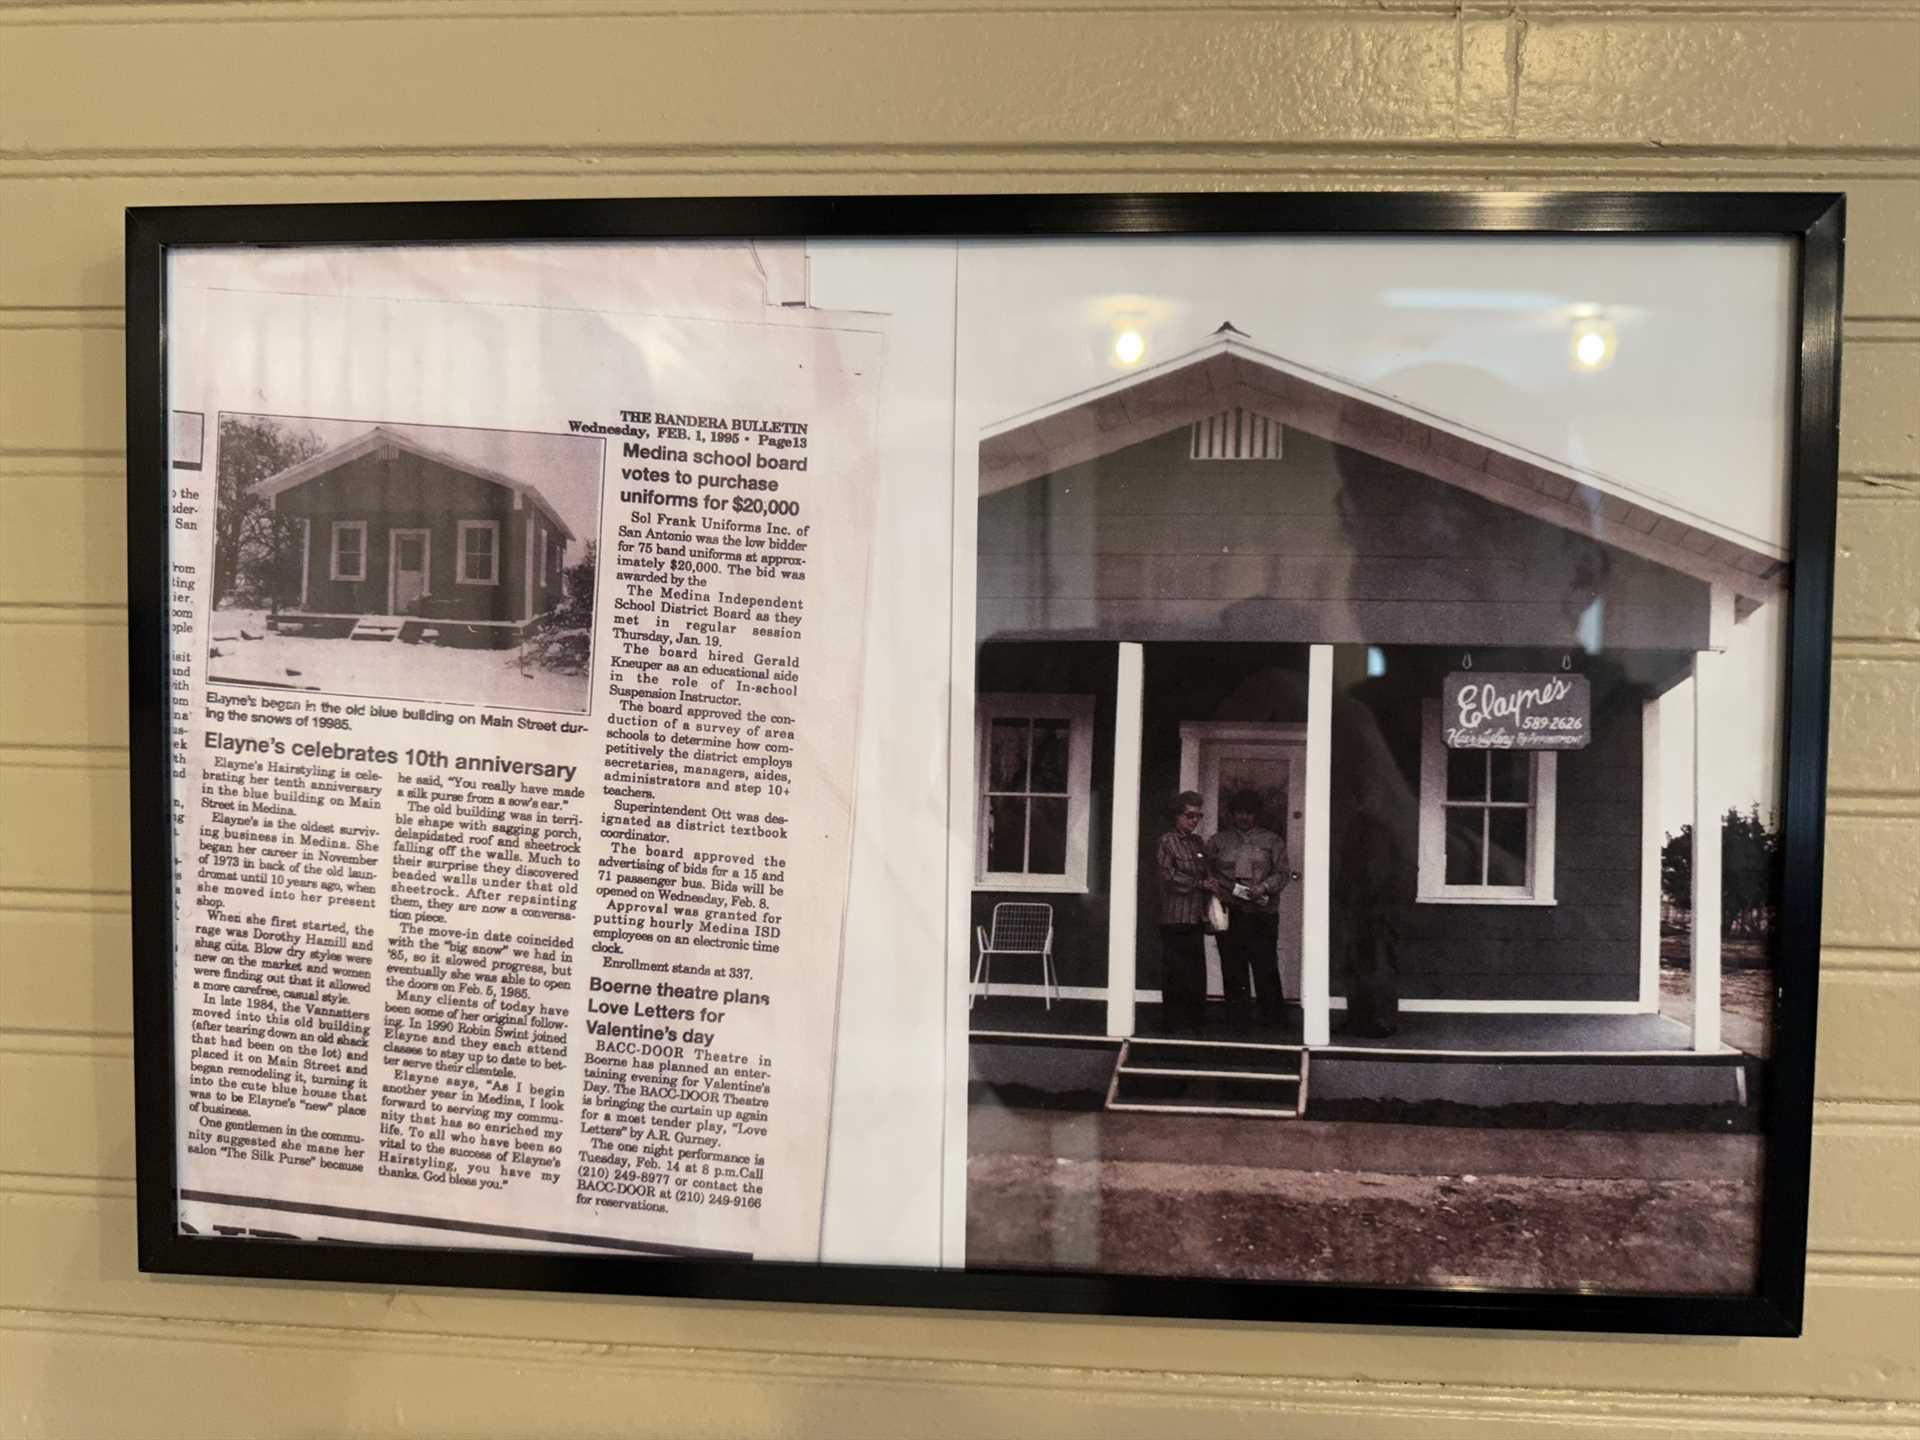                                                 The Texas Blue Apple Cottage has a long history of goodwill and the laughter of friends and neighbors!